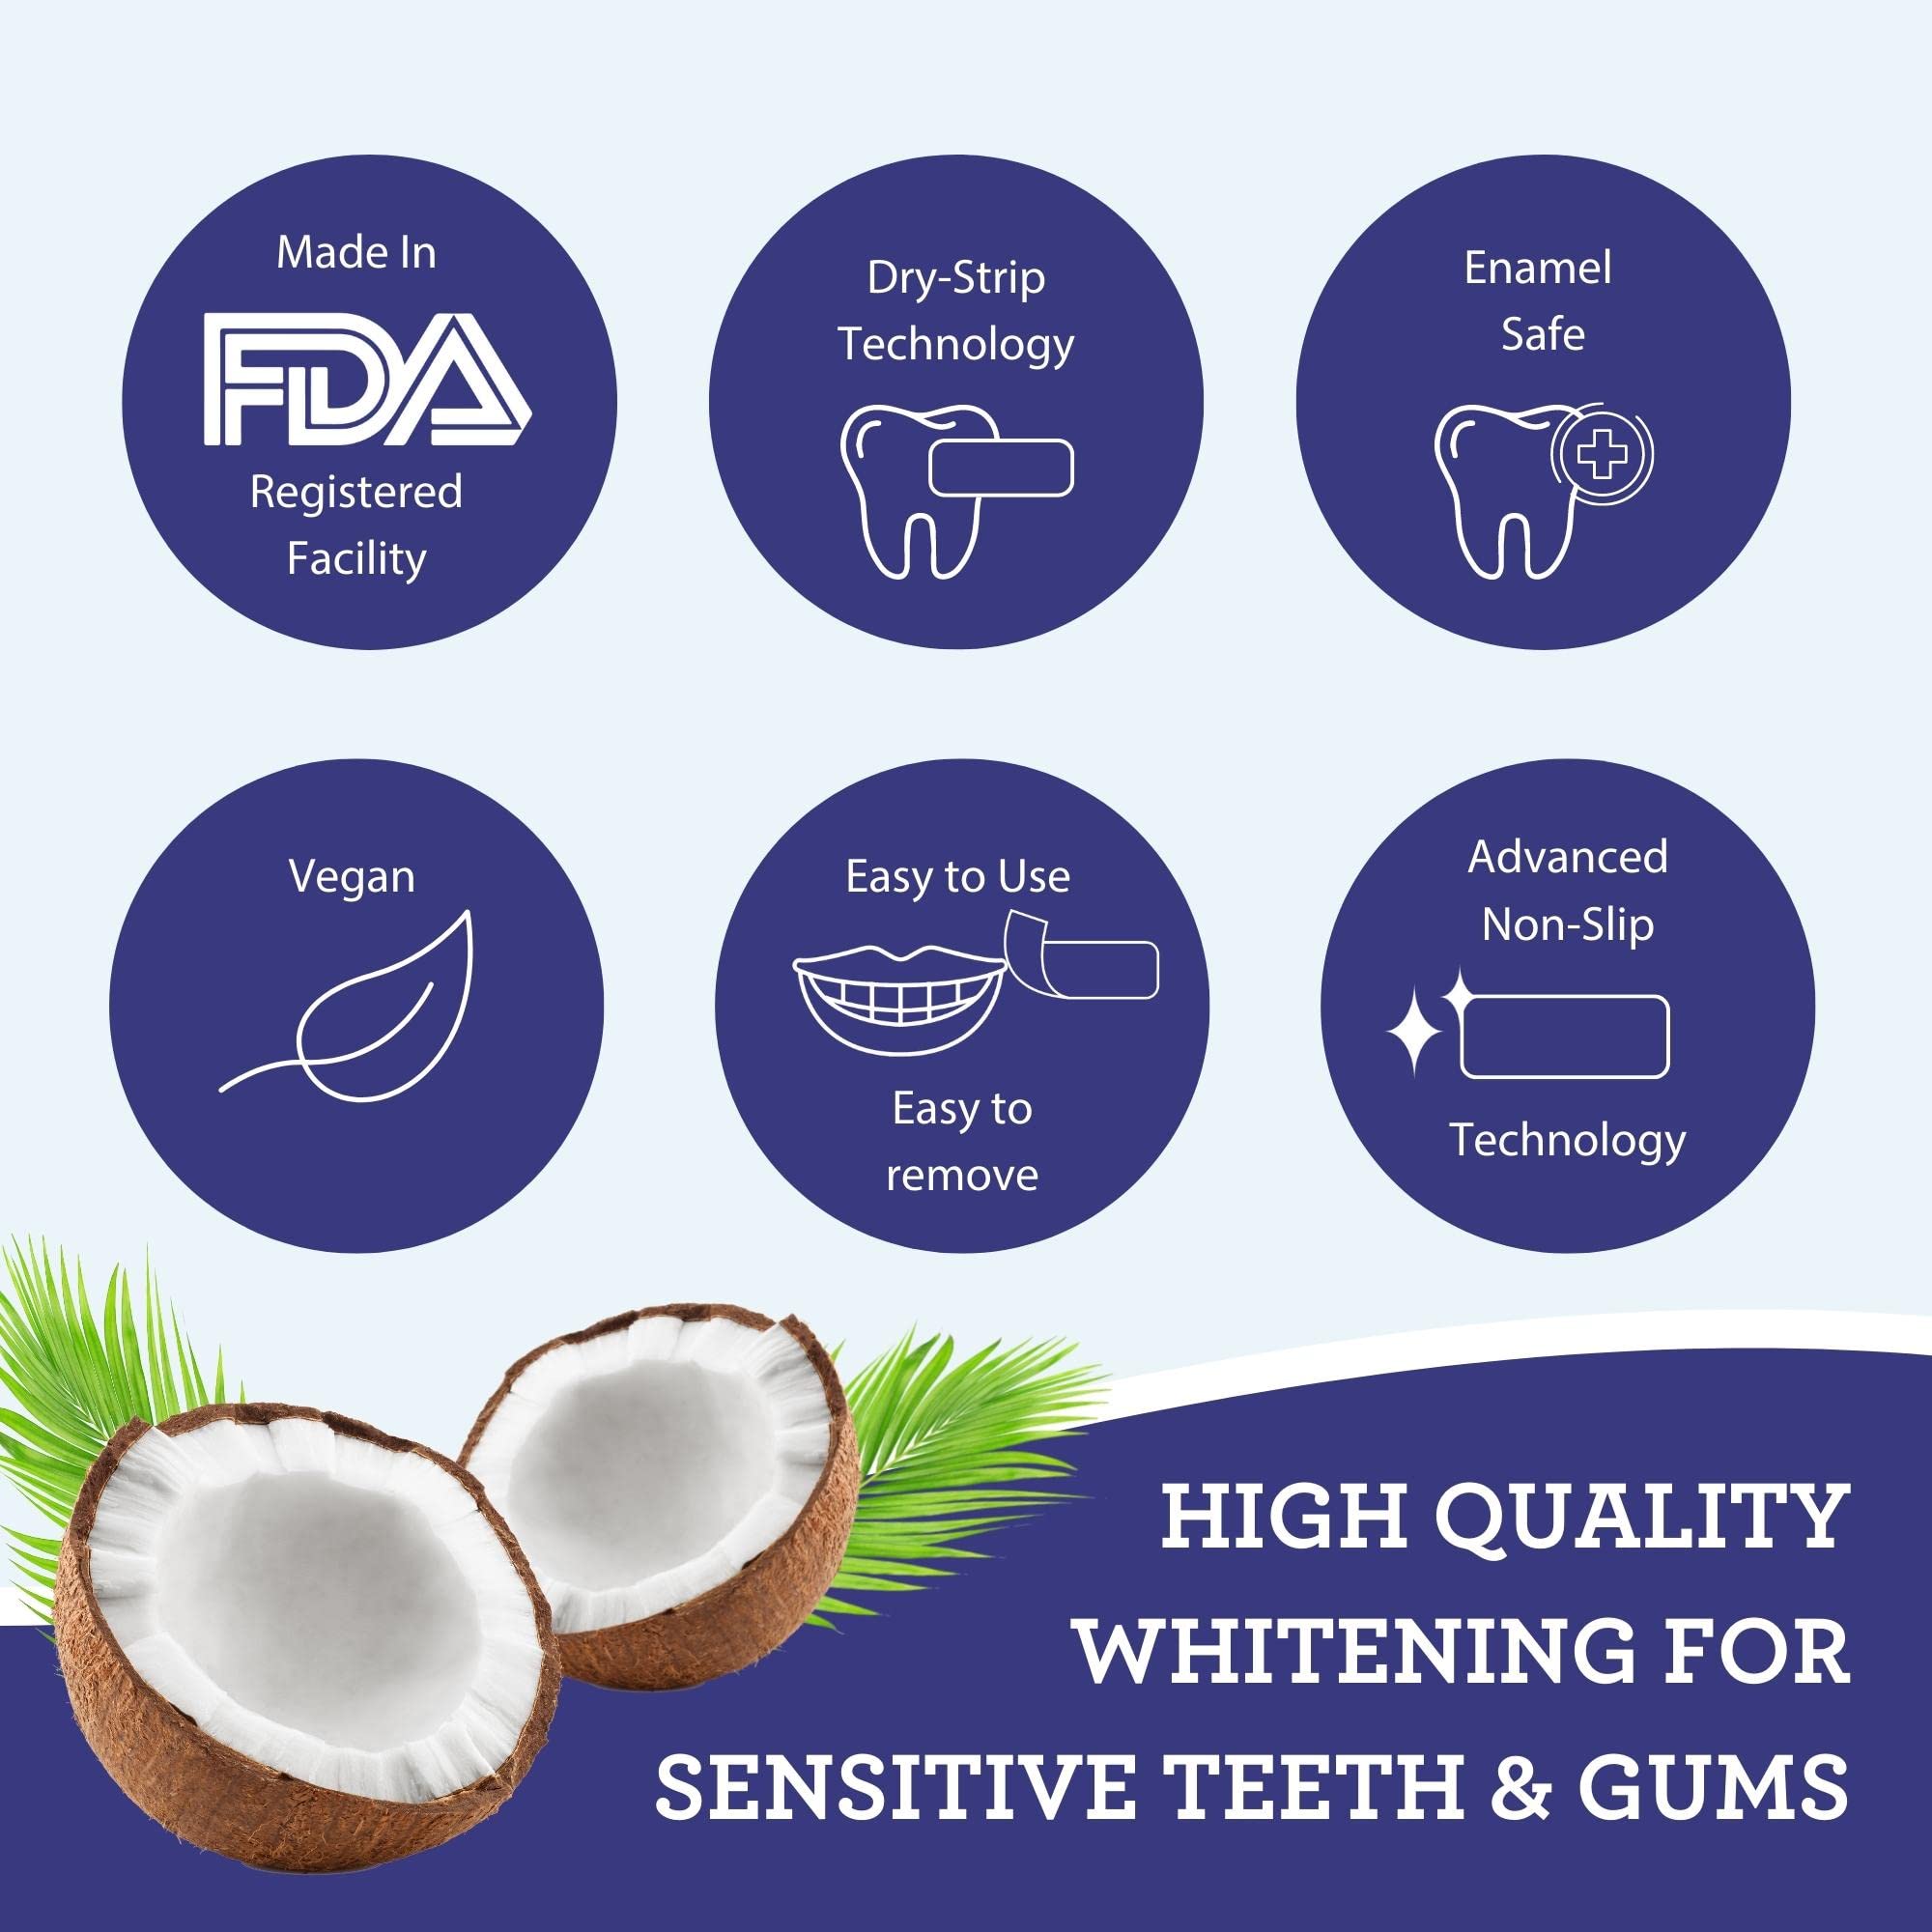 GuruNanda Teeth Whitening Strips with Coconut Oil - 14 Enamel Safe Strips for Sensitive Teeth - Non-Slip, Dry Strip Technology for Whiter Teeth - 7 Professional Treatments with 30 Minutes Fast Results